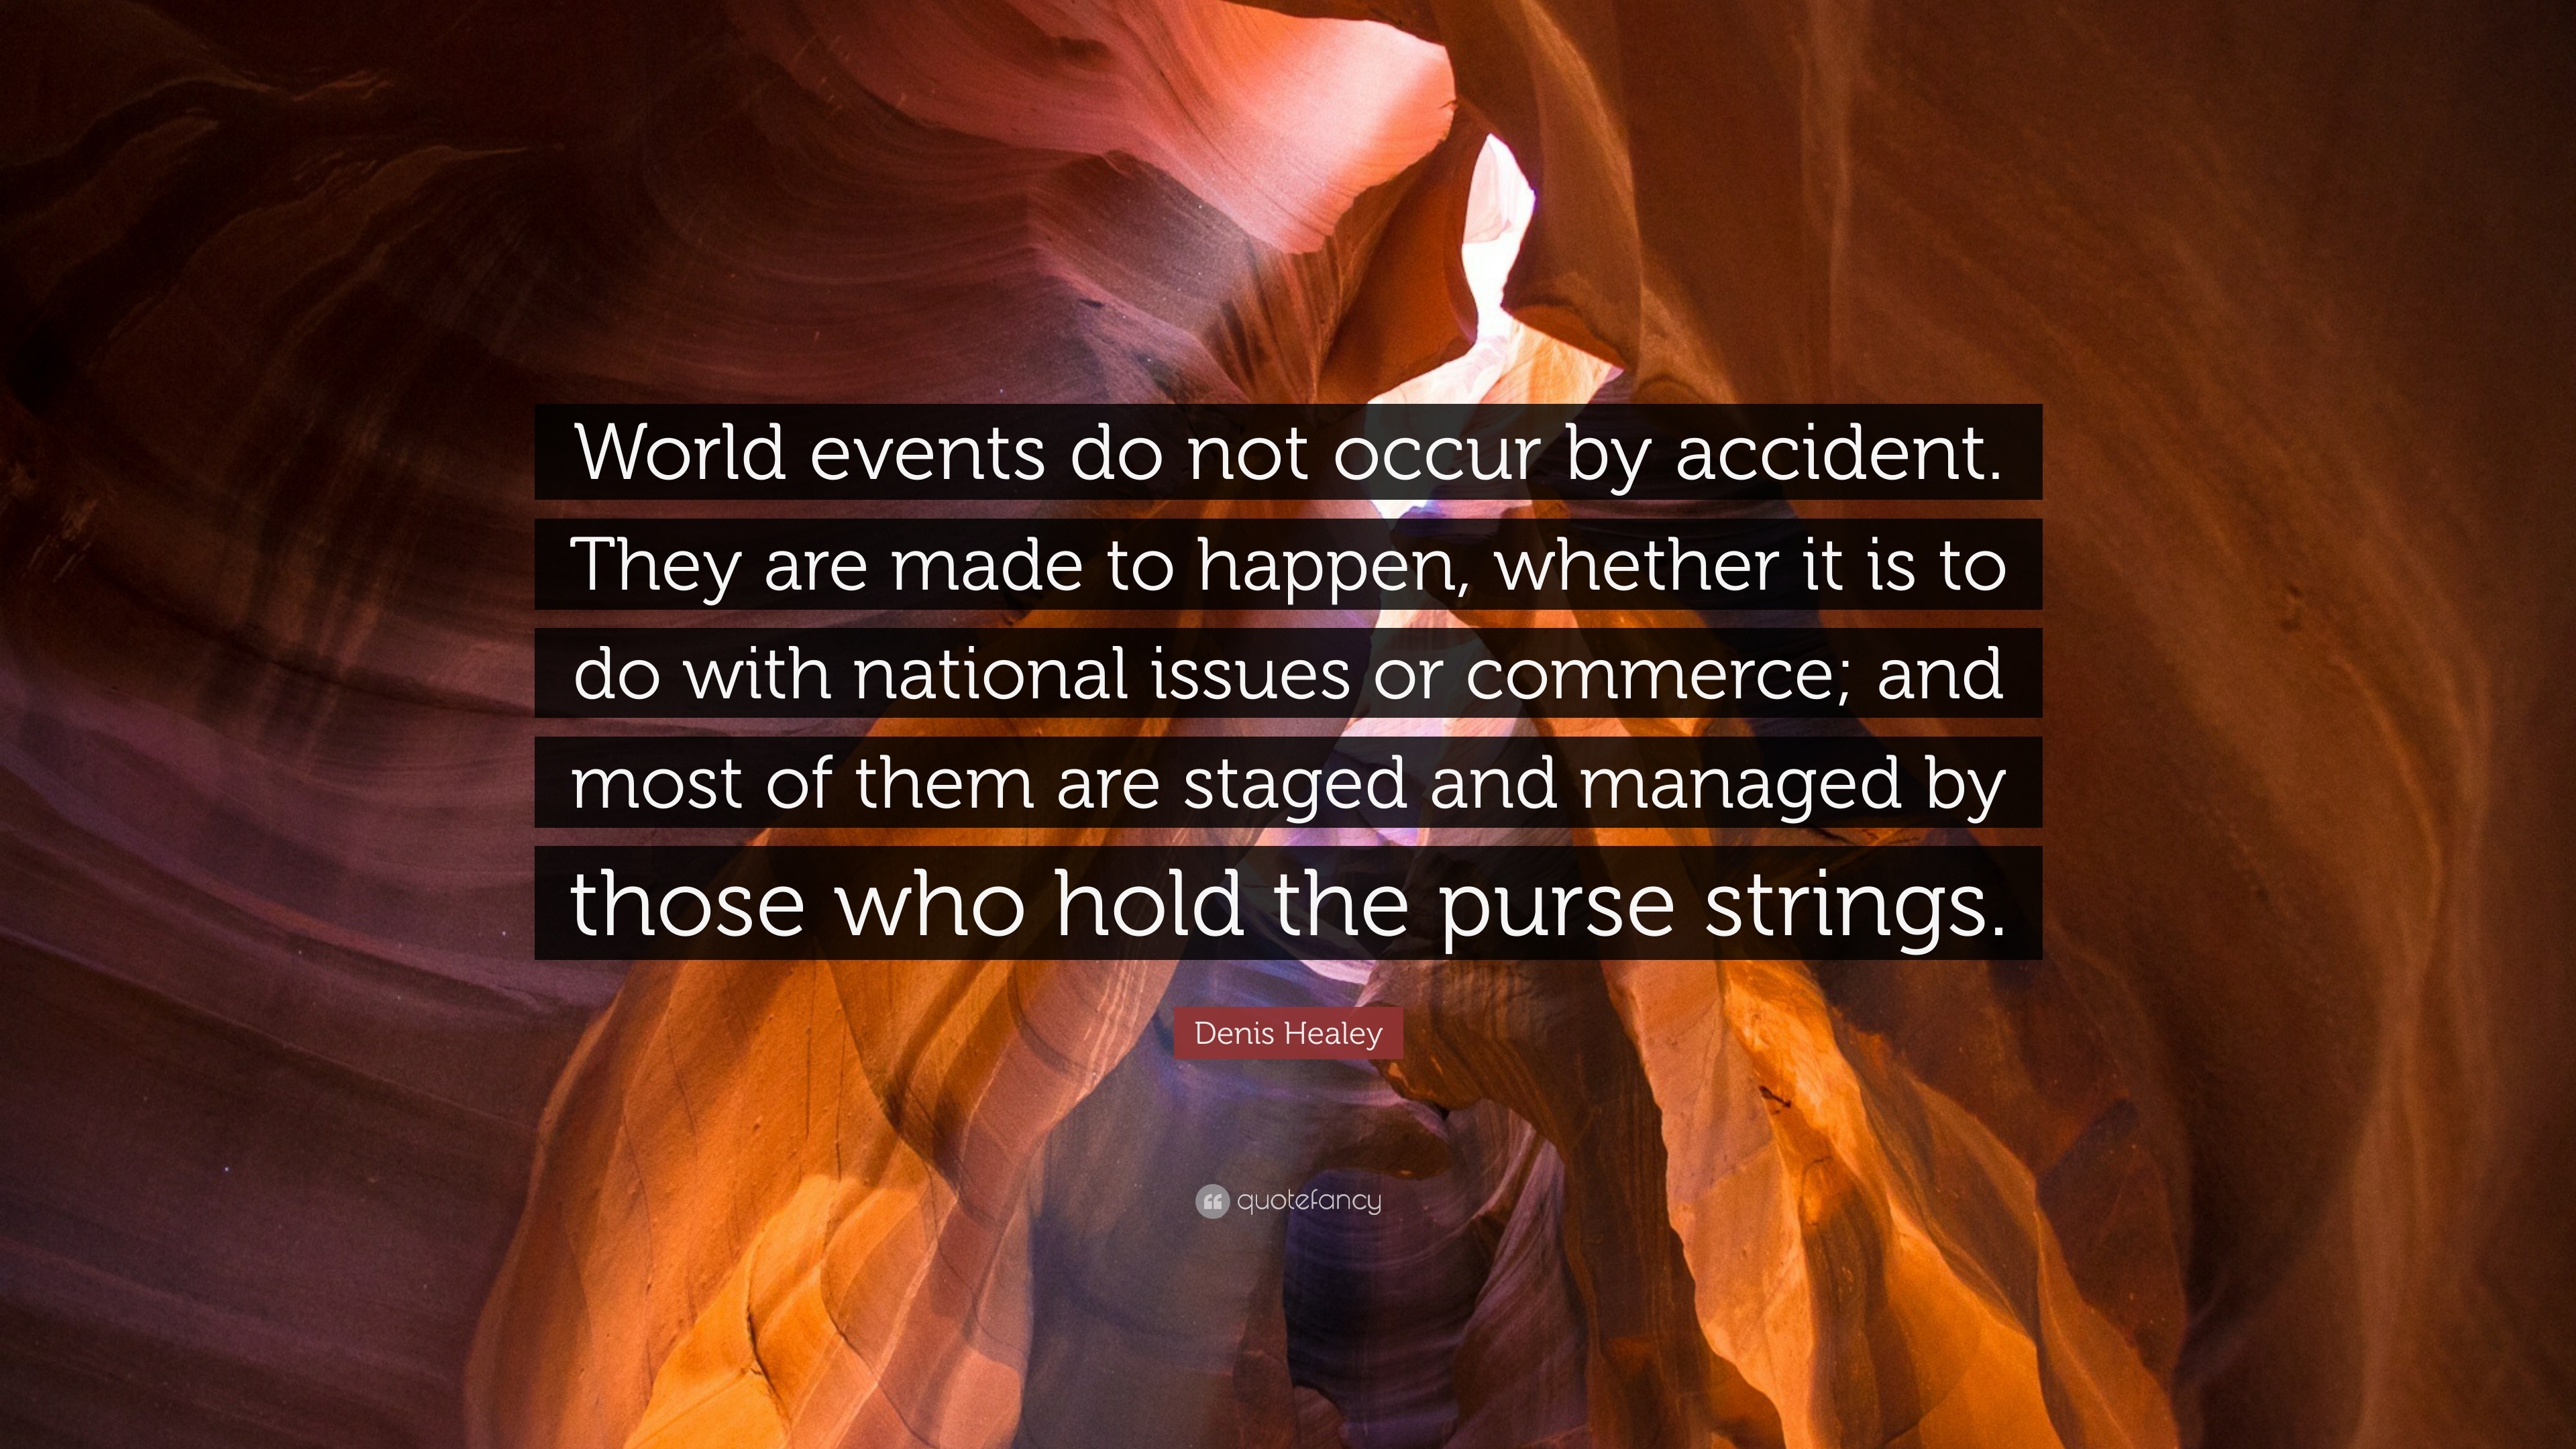 Hold The Purse Strings synonyms - 71 Words and Phrases for Hold The Purse  Strings